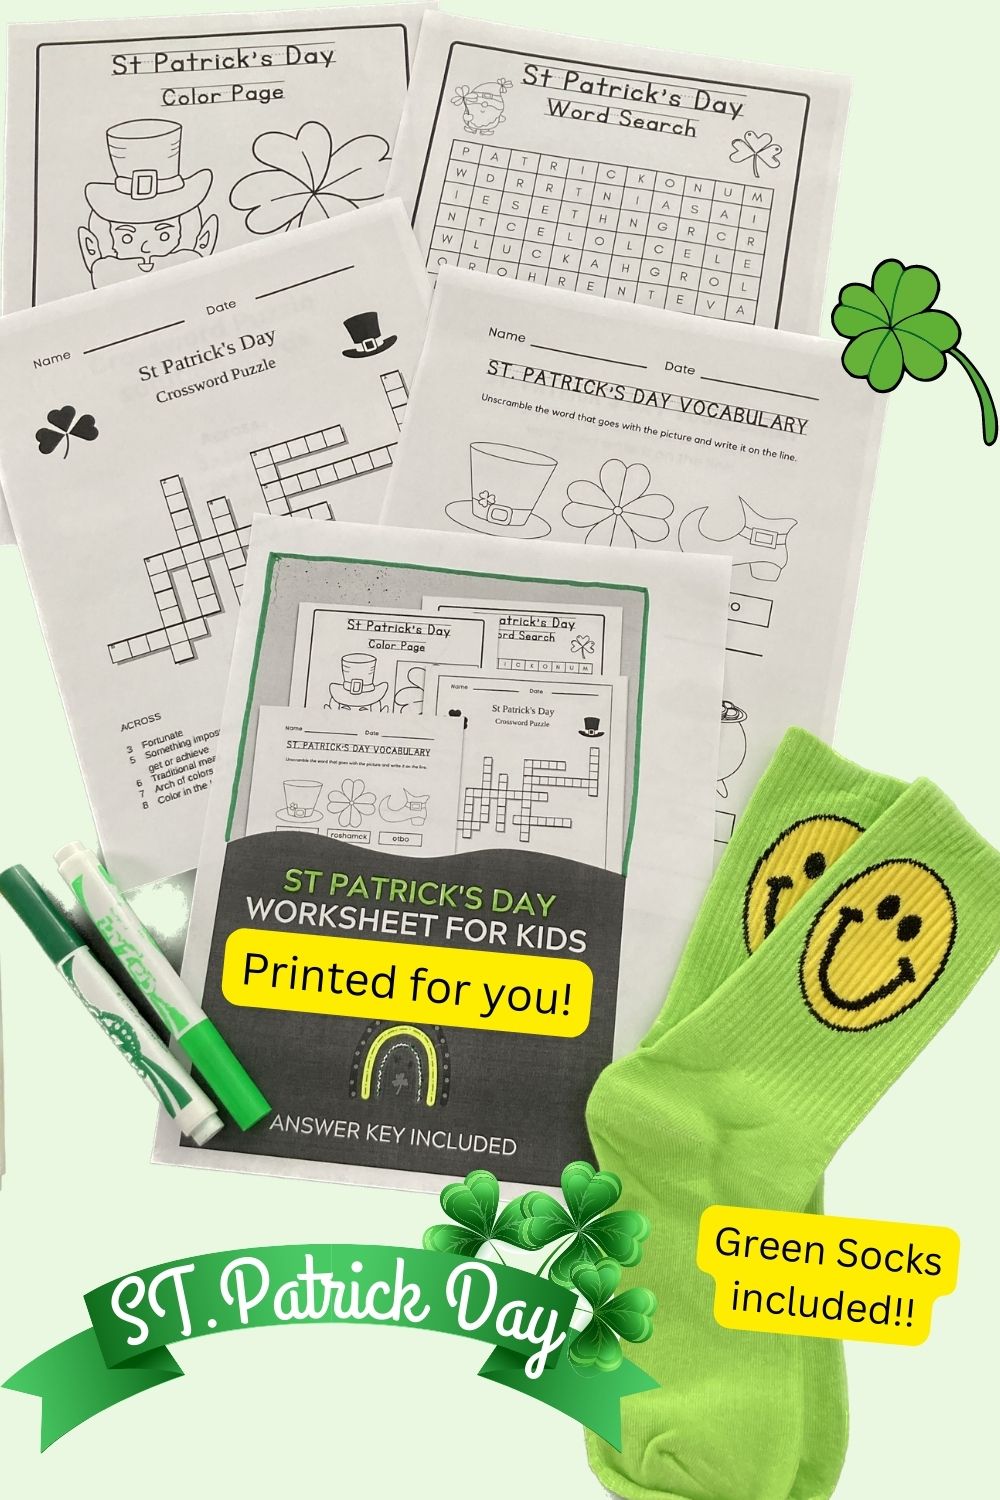 St Patrick's Day Games for Kids | Word Search | Crossword | Color Page | Word Scramble | Bonus Green Socks included